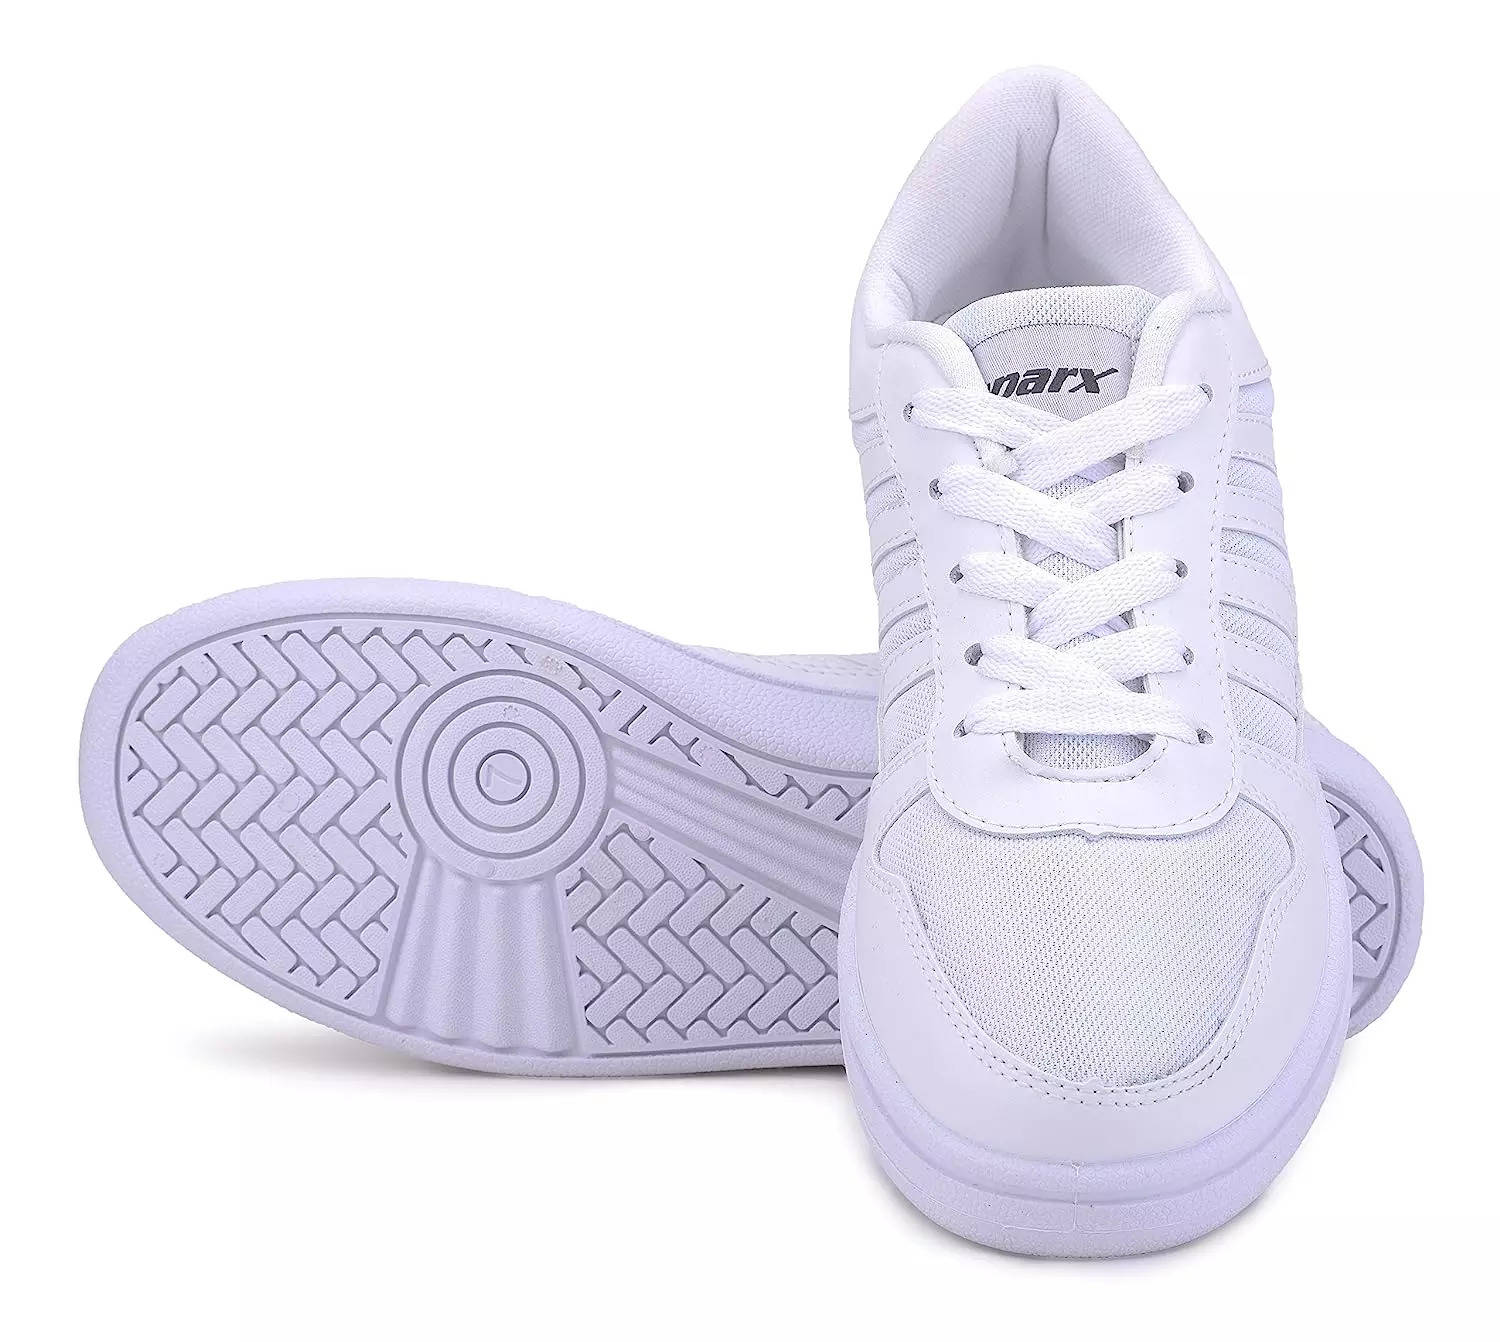 Buy Sparx Men SM-514 White Sports Shoes Online at Low Prices in India -  Paytmmall.com